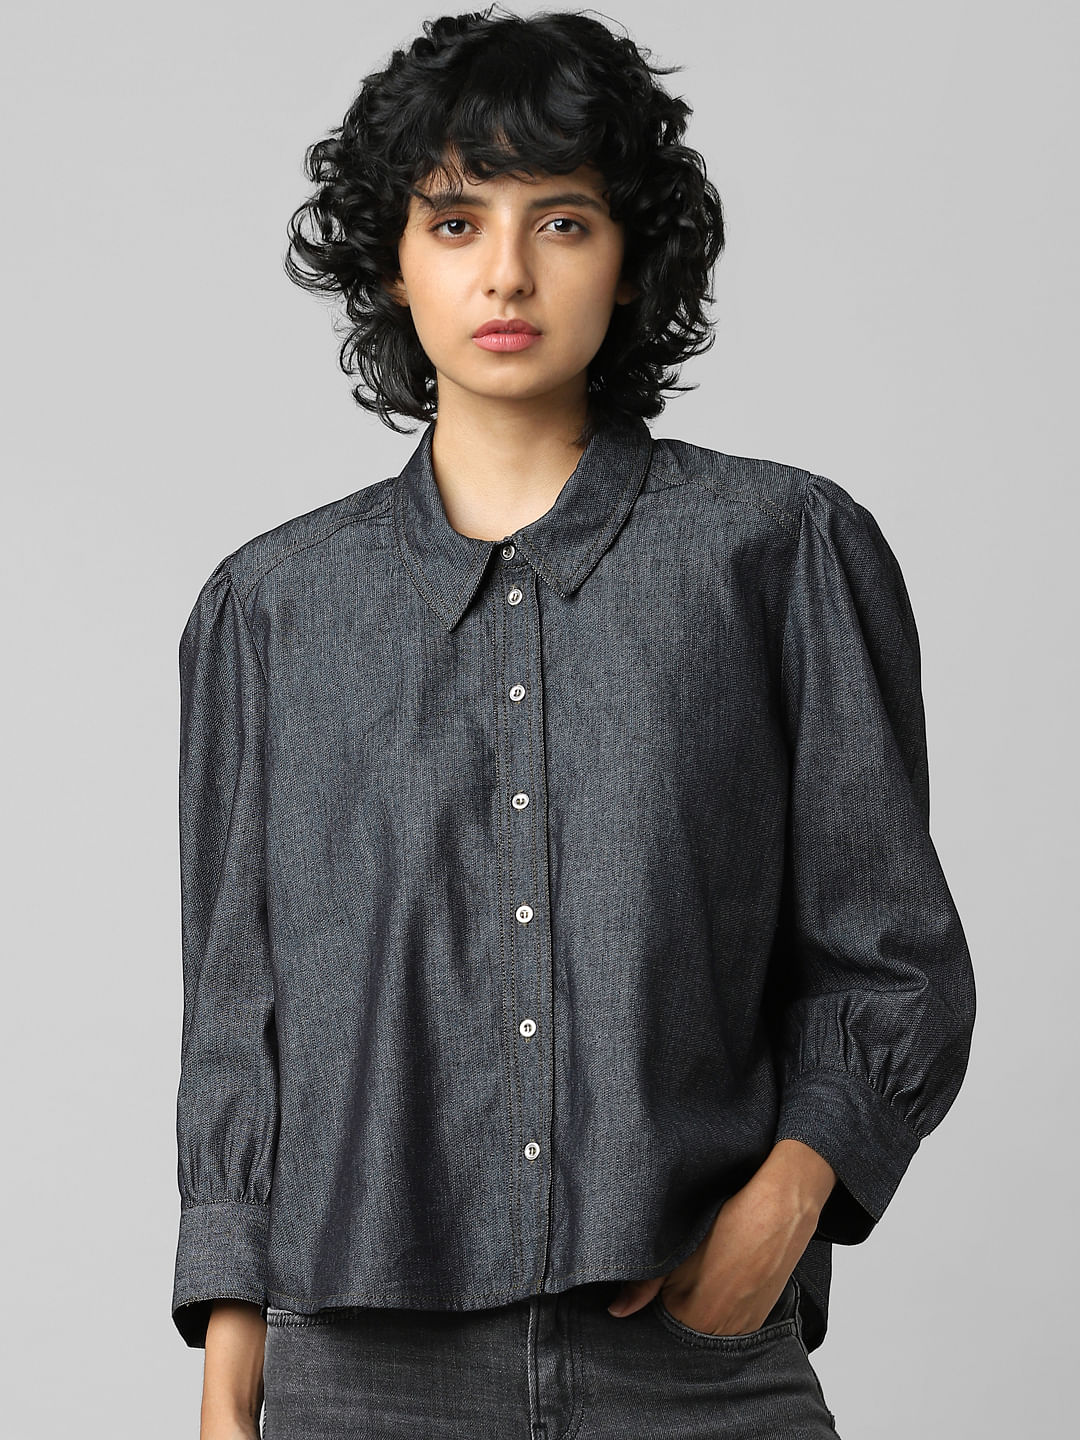 21 Best Men's Chambray Shirts 2023: Classic Button-Ups That Don't Feel So Buttoned  Up | GQ